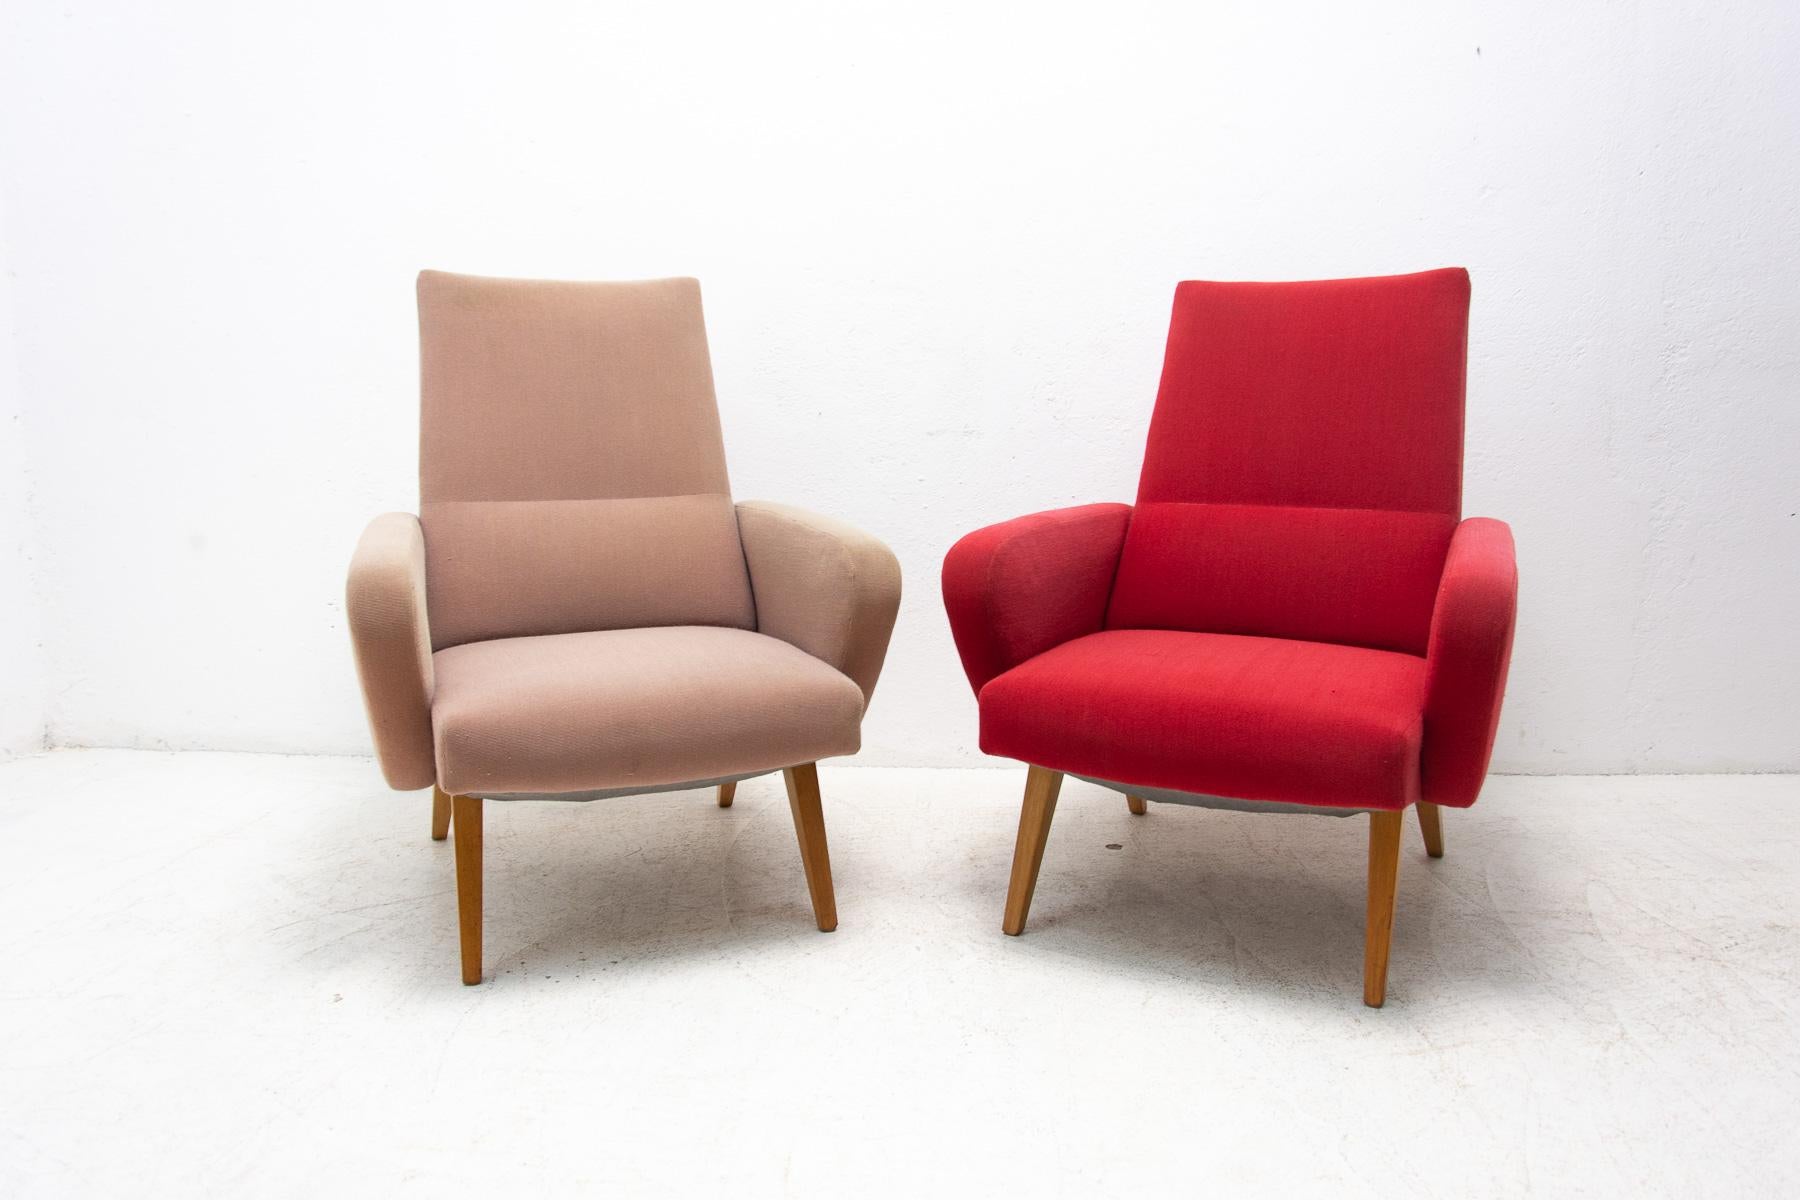 A pair of mid-century “His and her” armchairs.
Designed in the 1960s by prominent Czechoslovak designer Jaroslav Šmídek for UP Závody. Made in the former Czechoslovakia.
Made of fabric, springs and beech wood.
The color of the fabric was